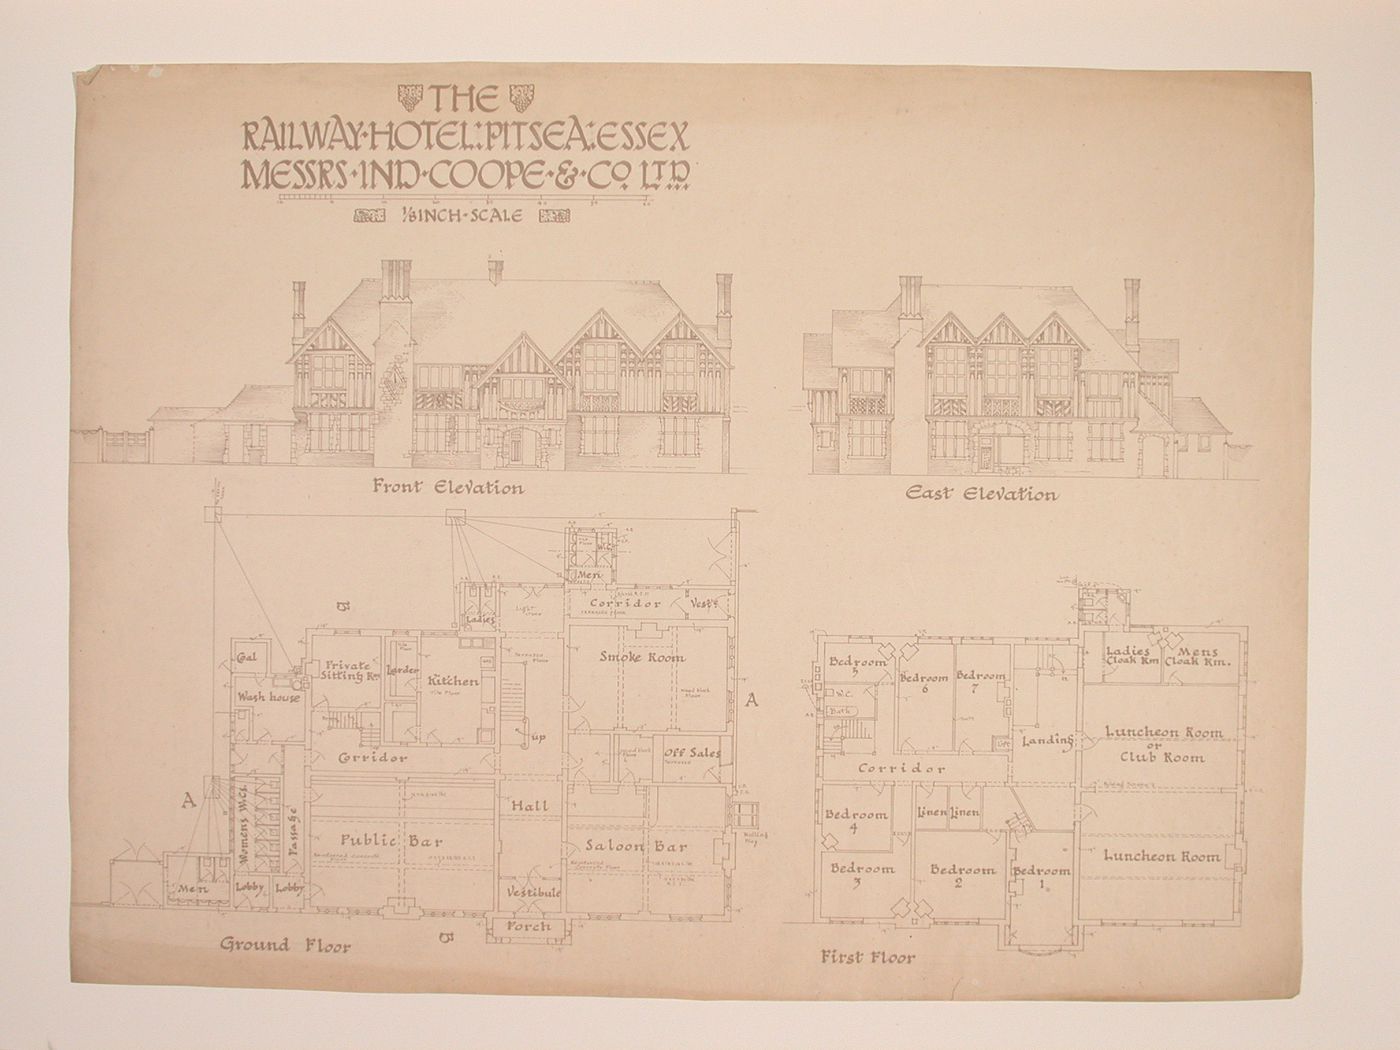 Front and east elevations and ground and first floor plans for the Railway Hotel, Pitsea